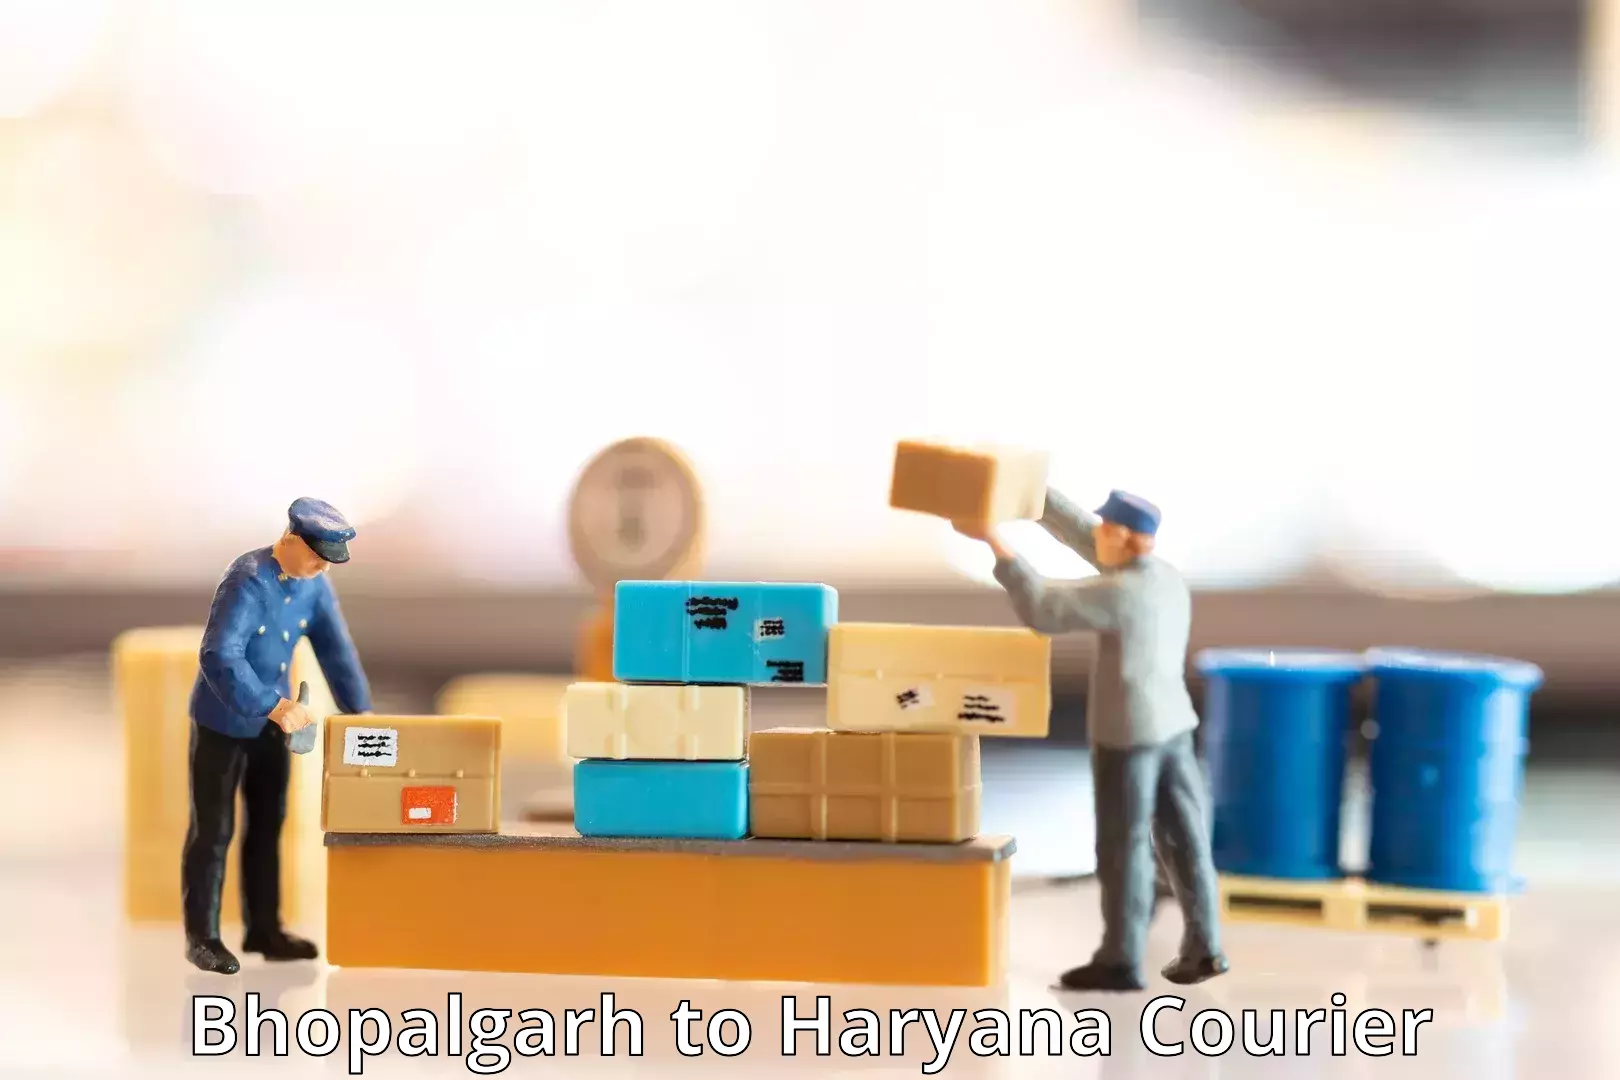 Customer-oriented courier services Bhopalgarh to NCR Haryana